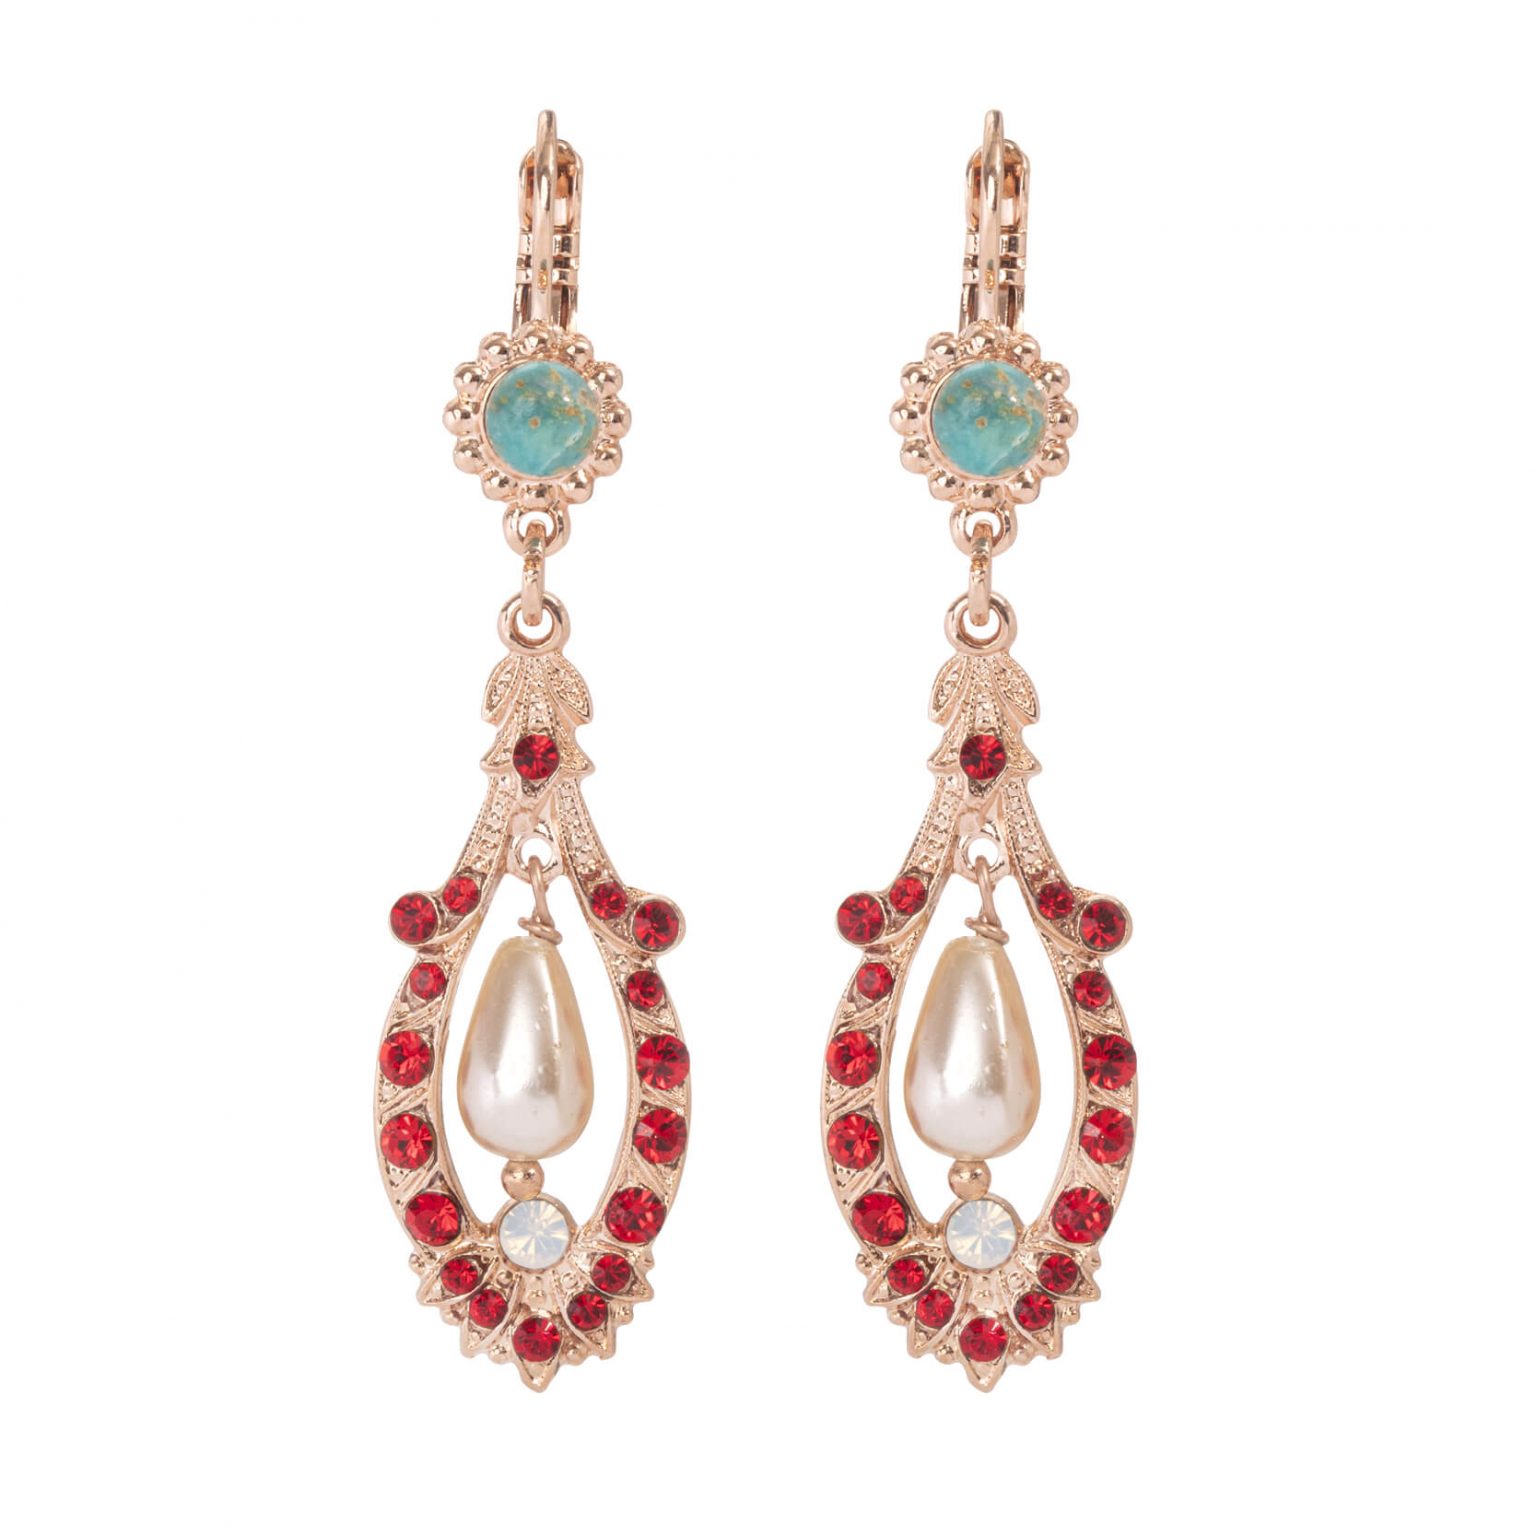 Mariana Jewellery – OFFICIAL STORE